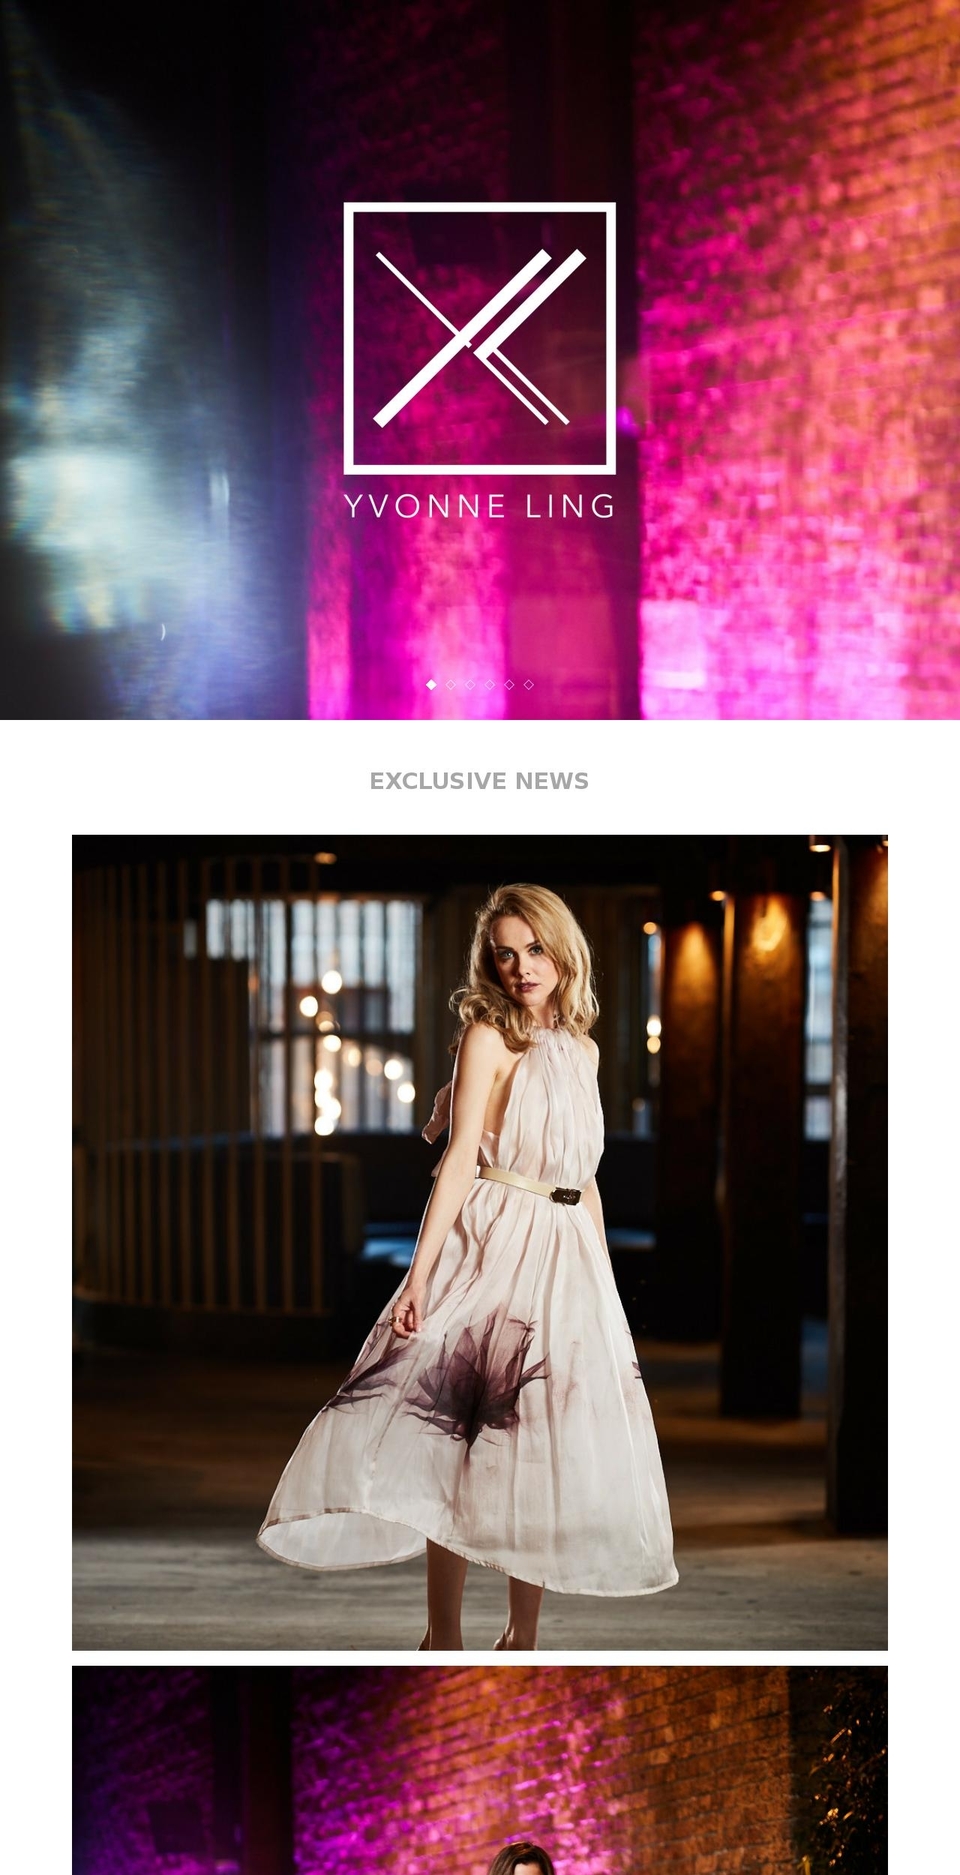 mosaic Shopify theme site example yvonneling.com